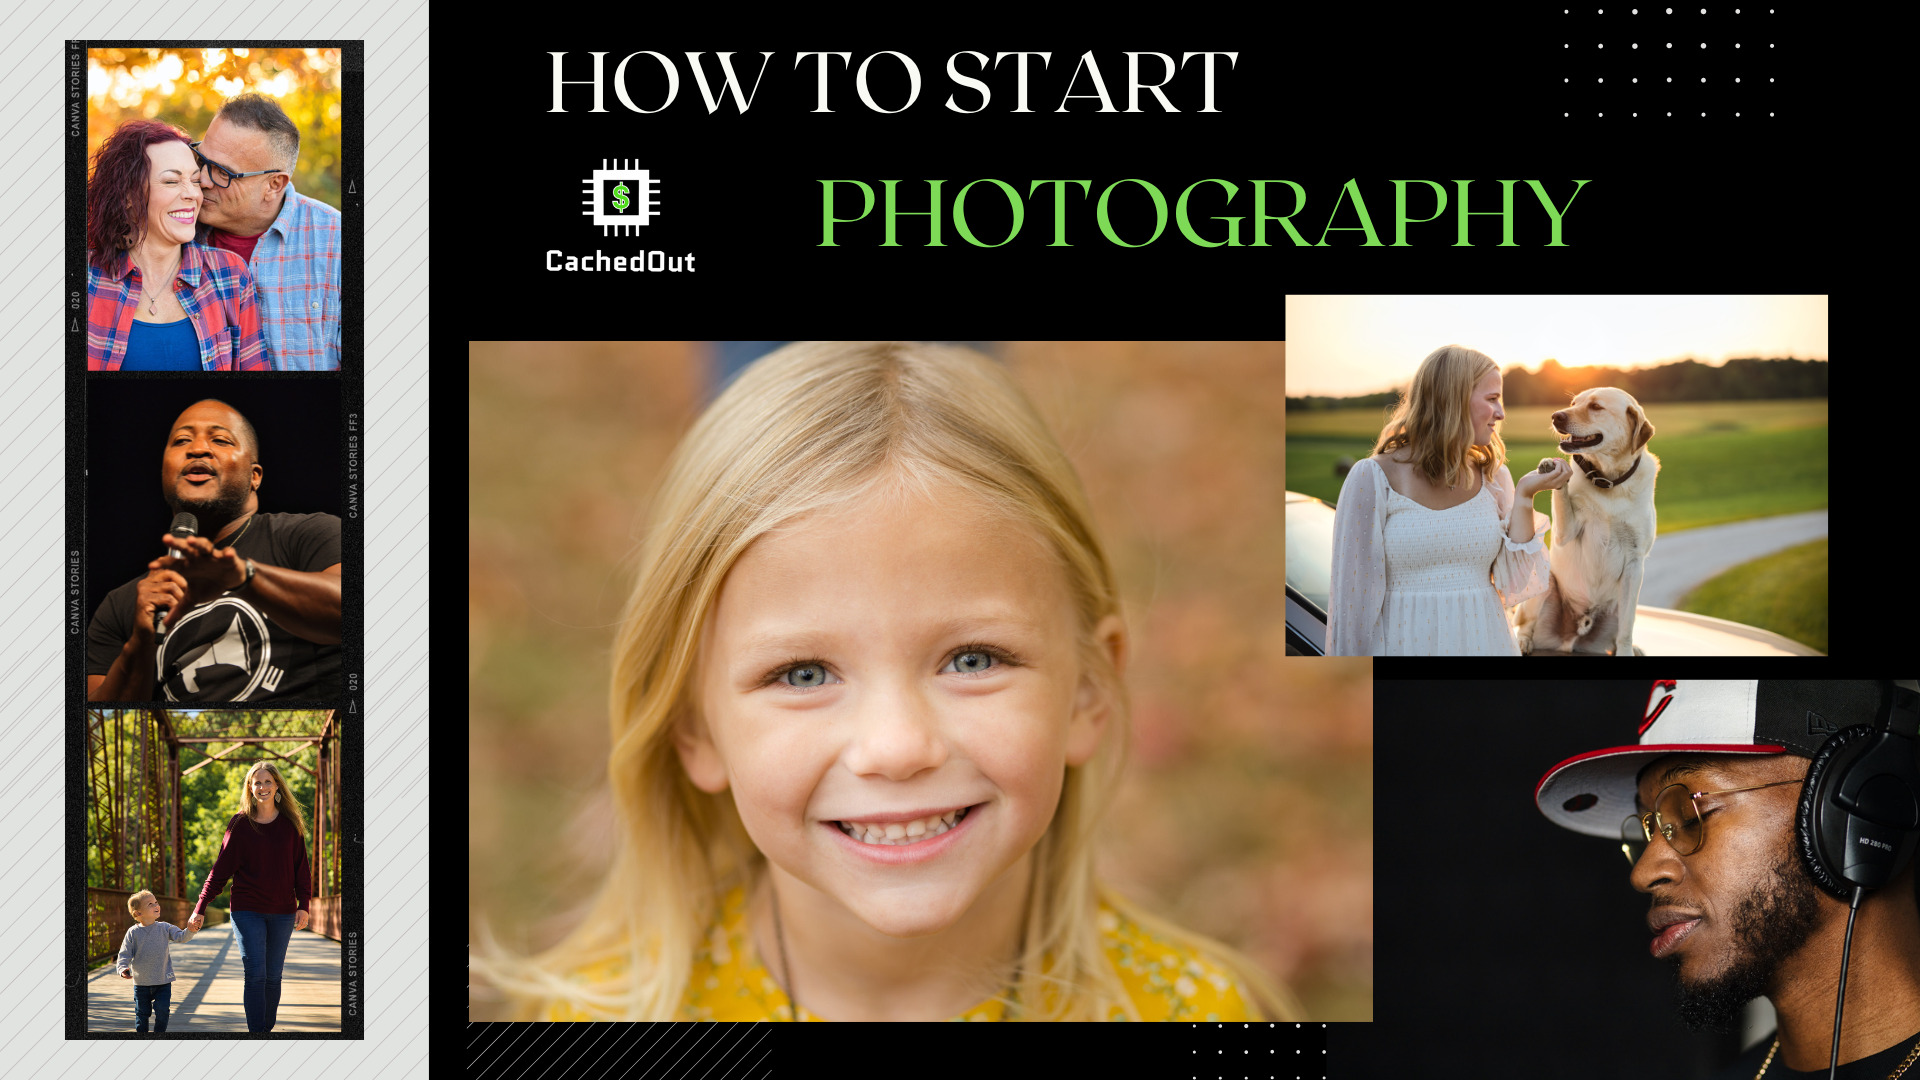 How to start photography